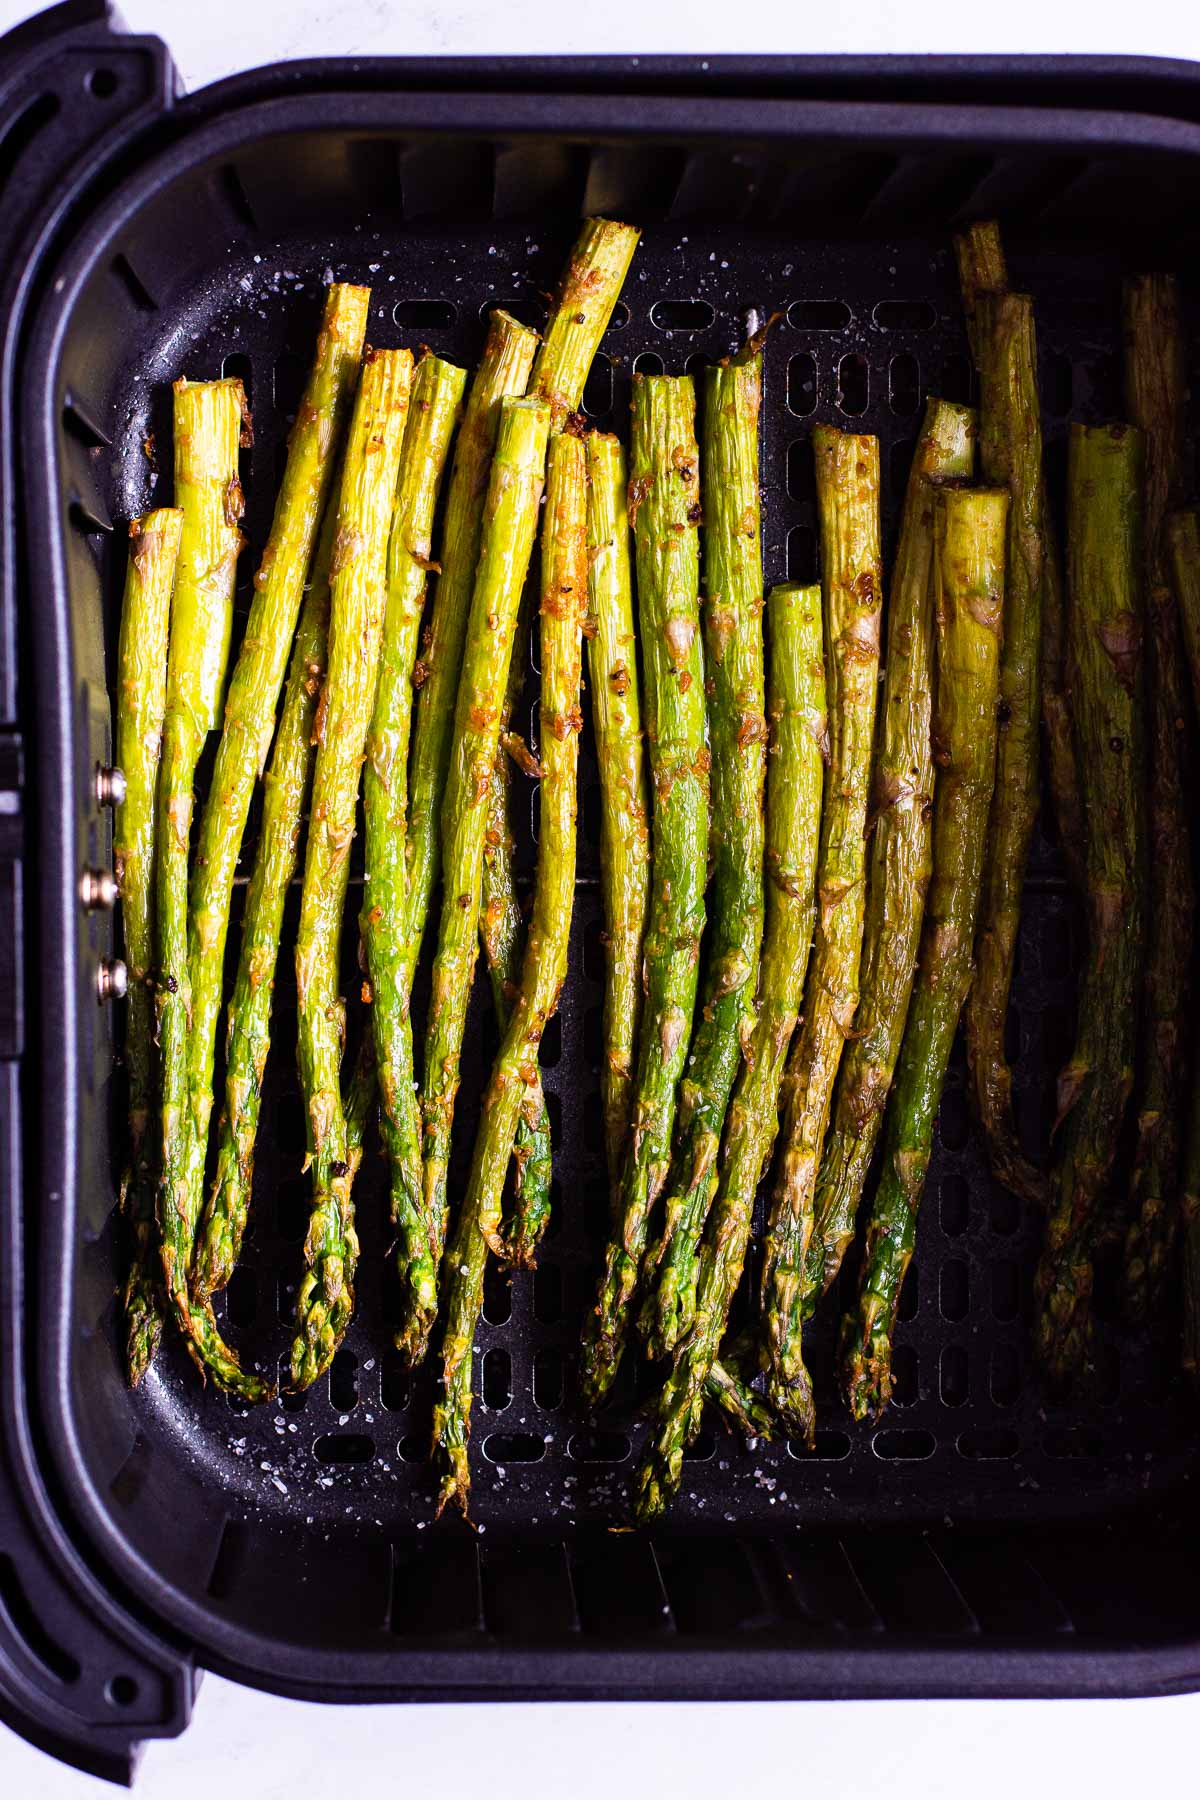 Cooked air fryer asparagus with golden brown bits and seasoned with salt.